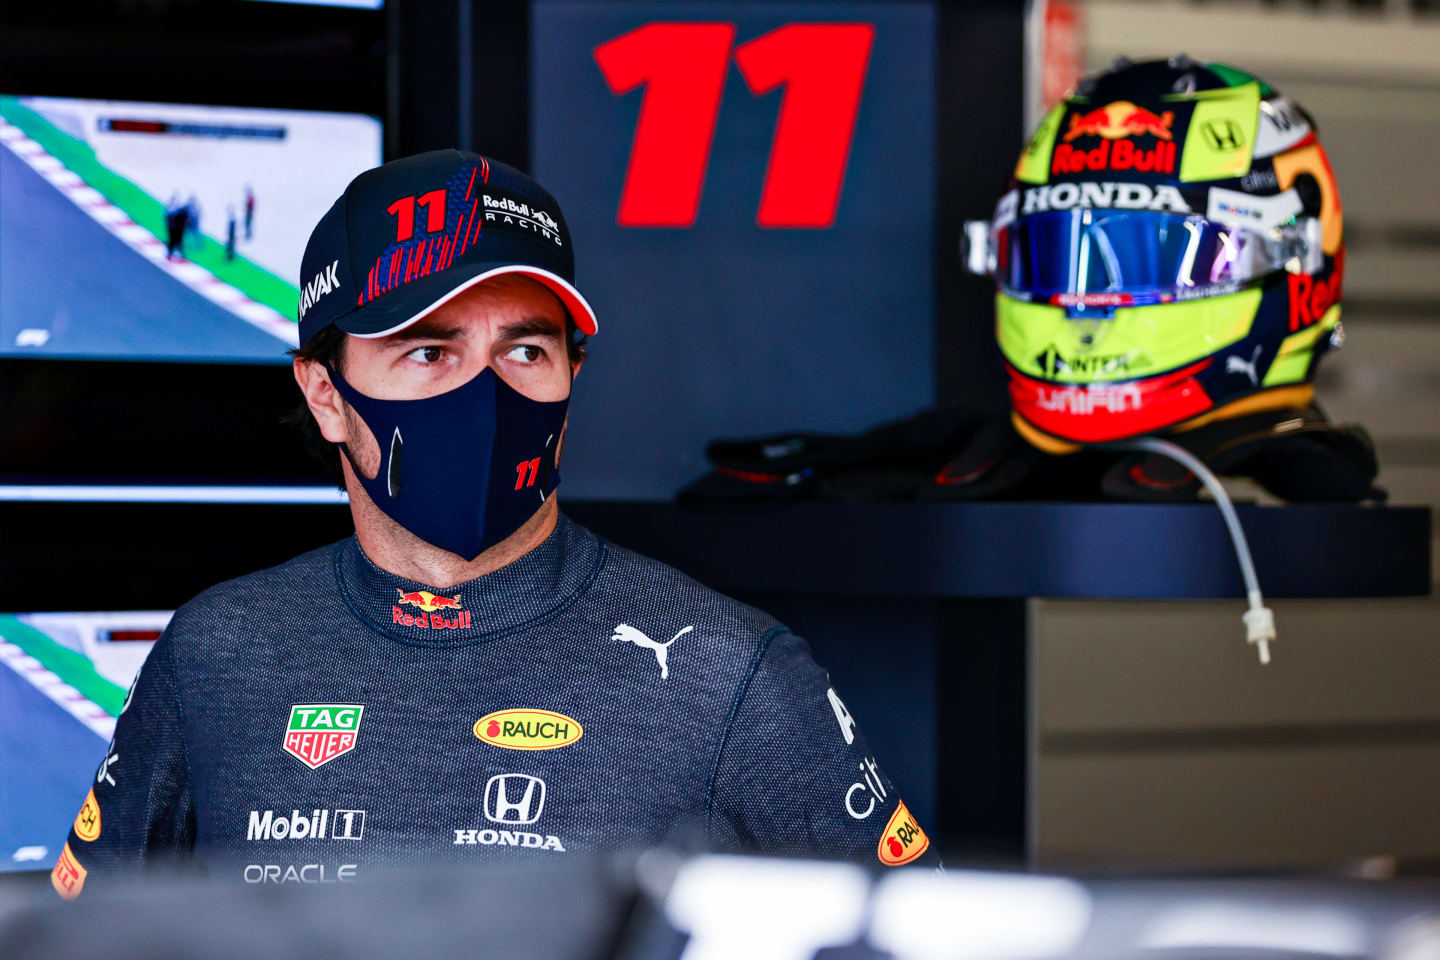 PORTIMAO, PORTUGAL - APRIL 30: Sergio Perez of Mexico and Red Bull Racing prepares to drive in the garage during practice ahead of the F1 Grand Prix of Portugal at Autodromo Internacional Do Algarve on April 30, 2021 in Portimao, Portugal. (Photo by Mark Thompson/Getty Images)